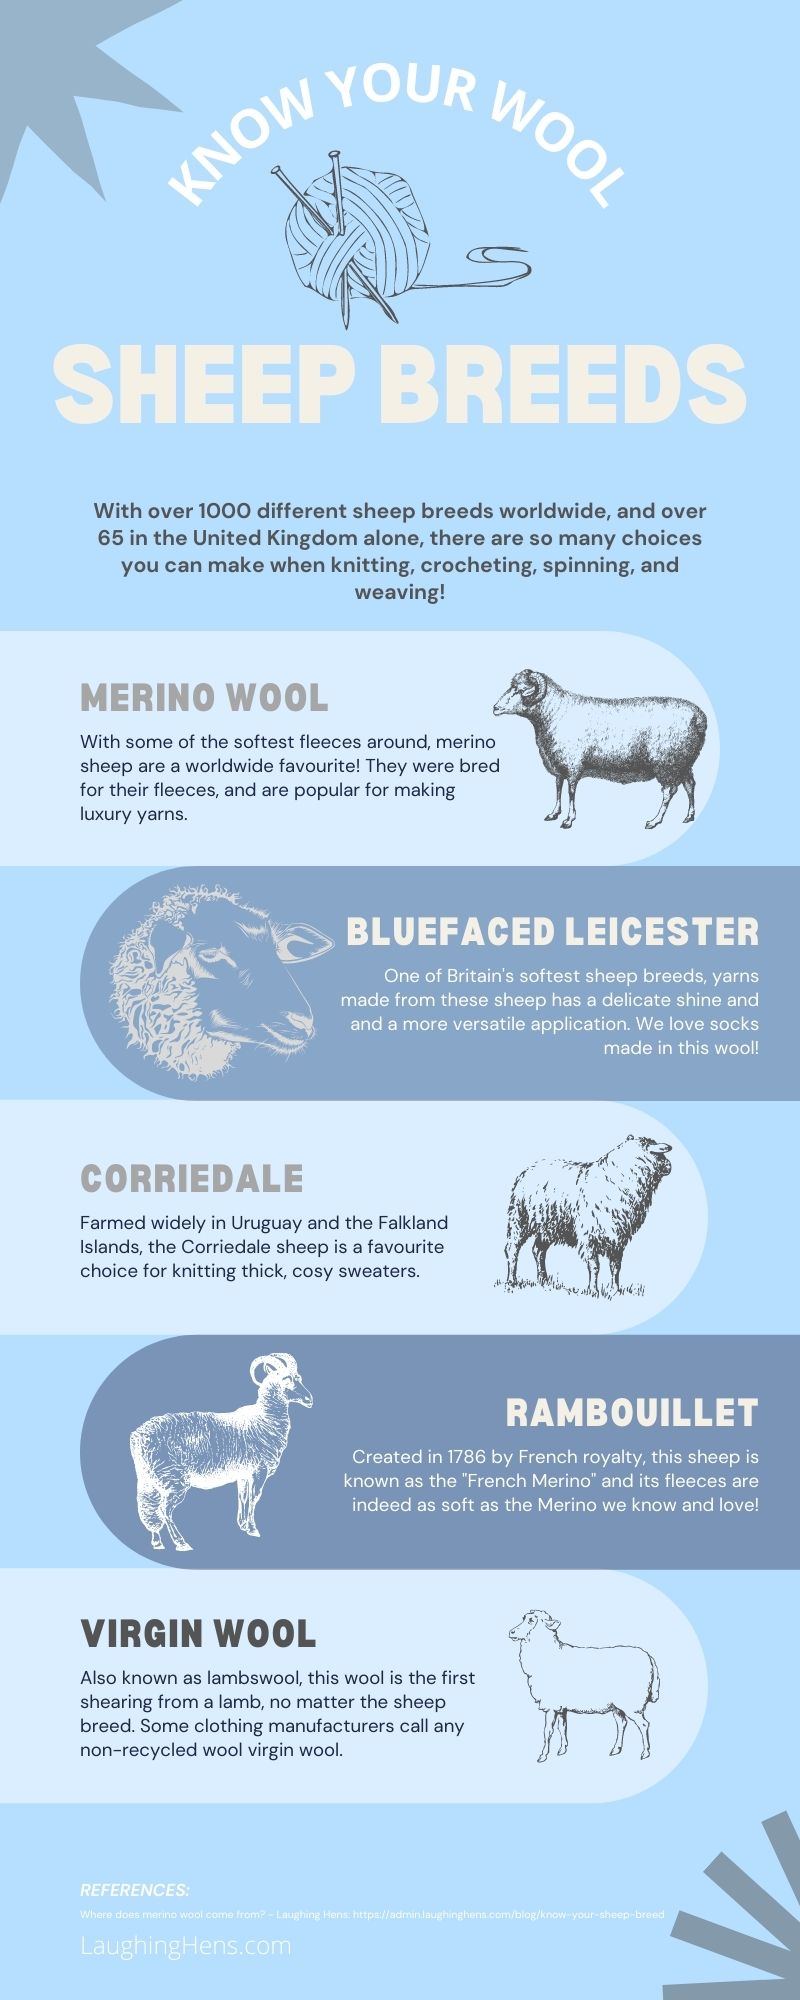 Merino wool and other sheep breeds